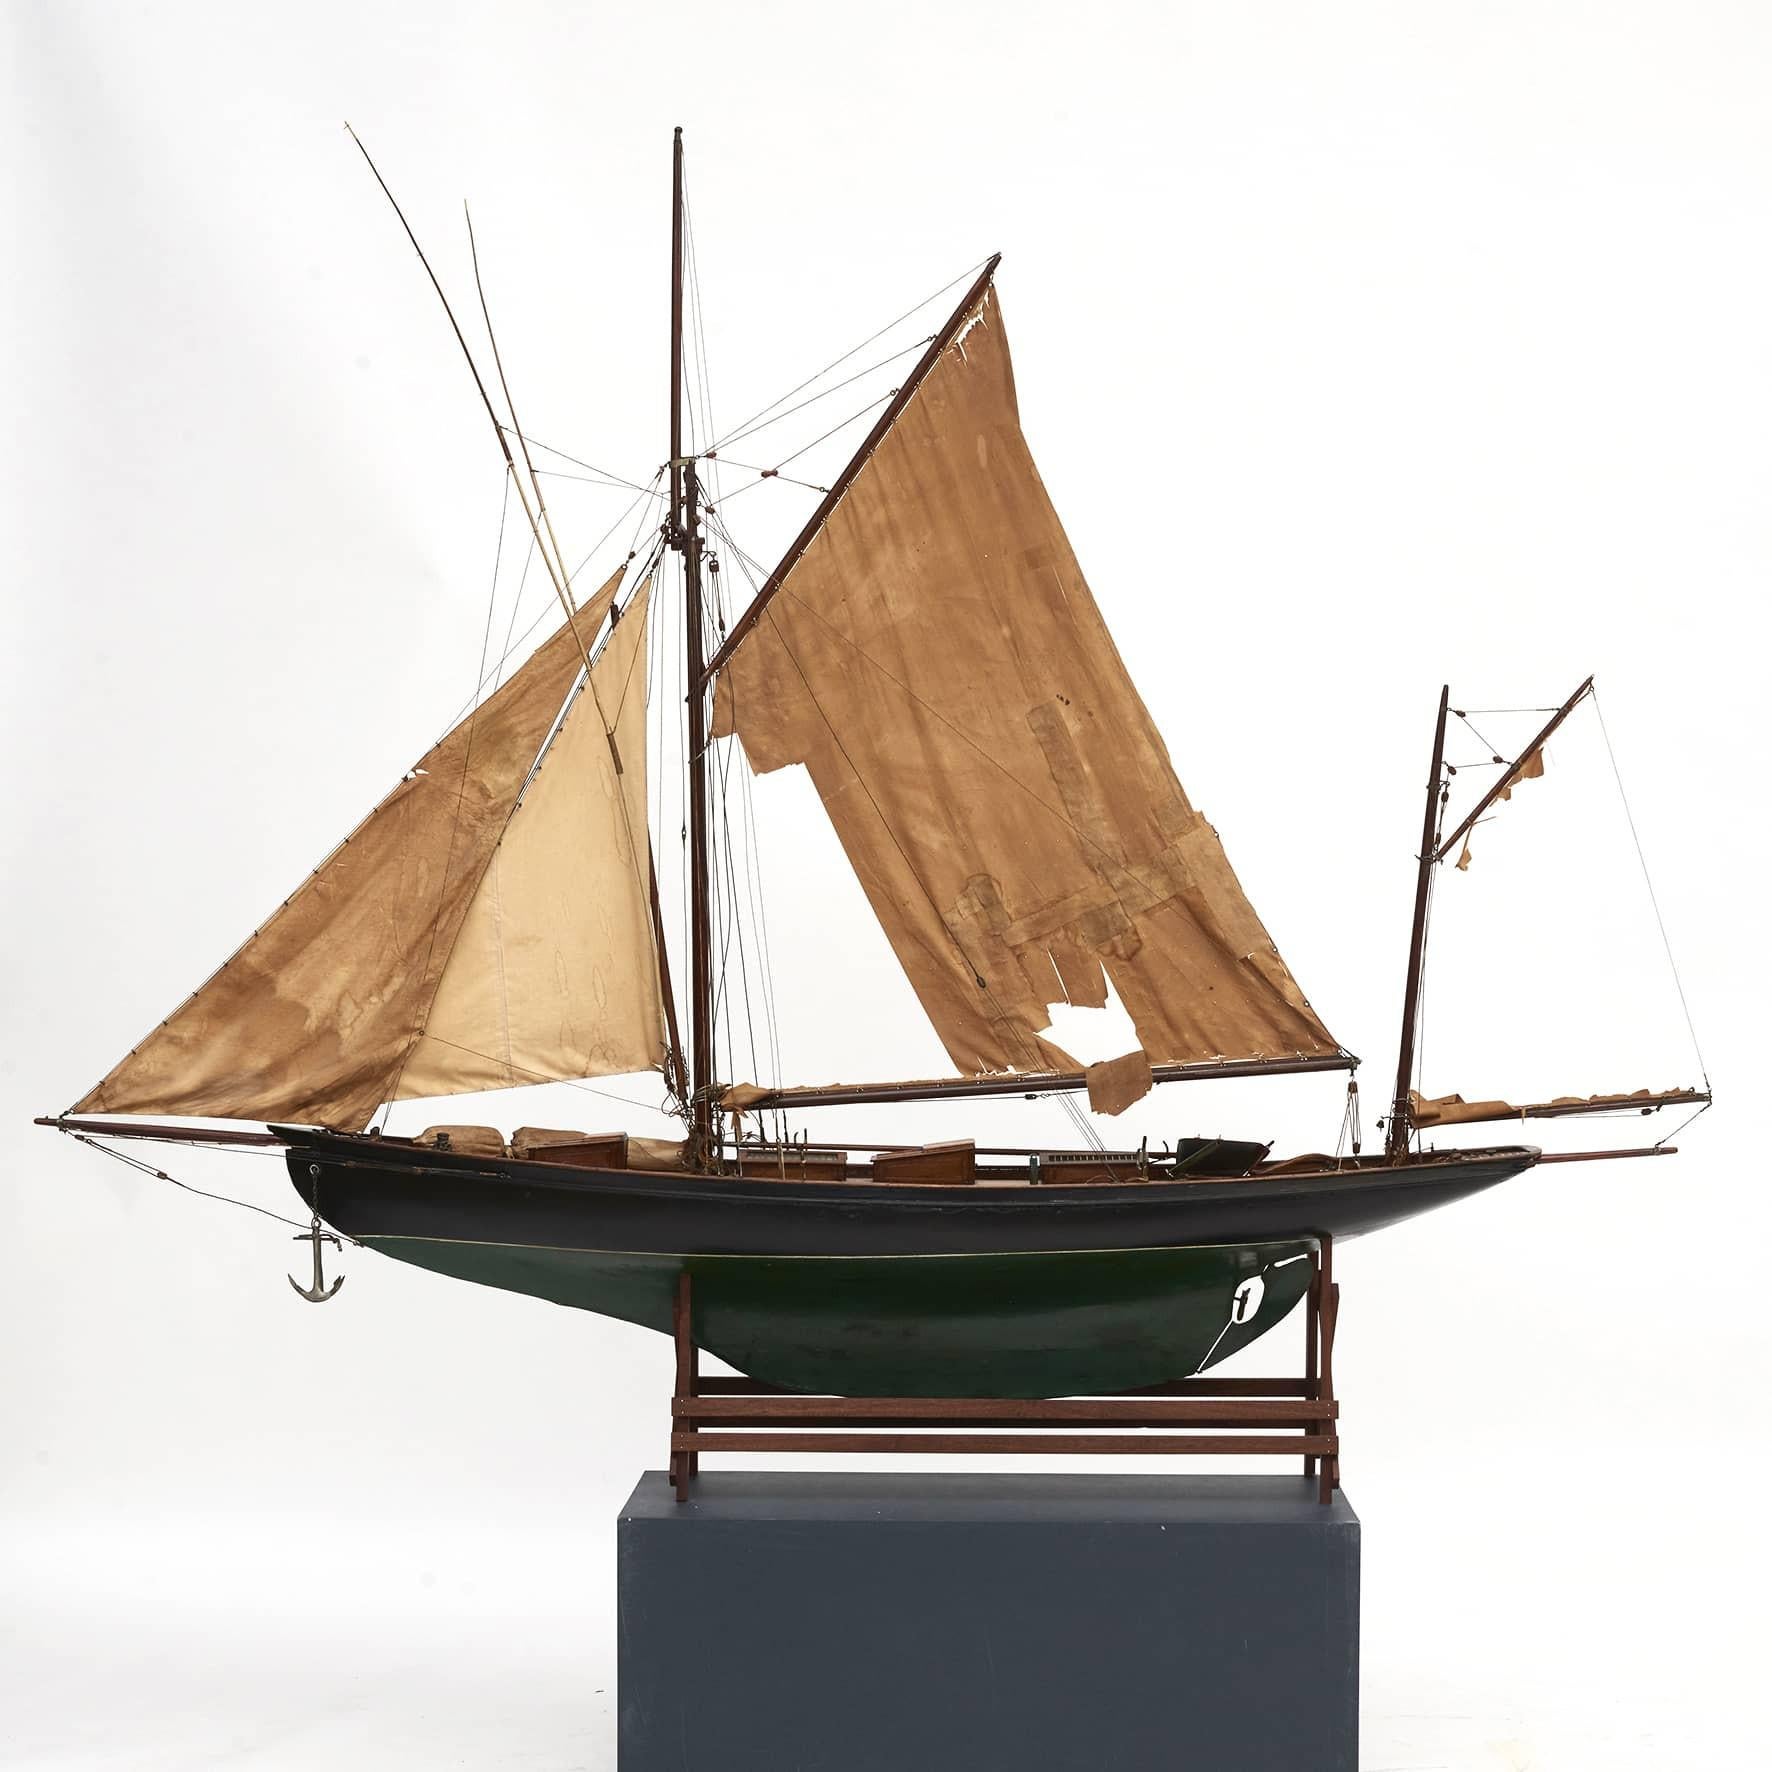 Hand built c. 1921-1930, Canada or England.
Made in a high quality with a whole number of fine details.
The model is in a original good condition with light surface refinish.
Original sails with tear and wear.
The sails can be replaced but for a